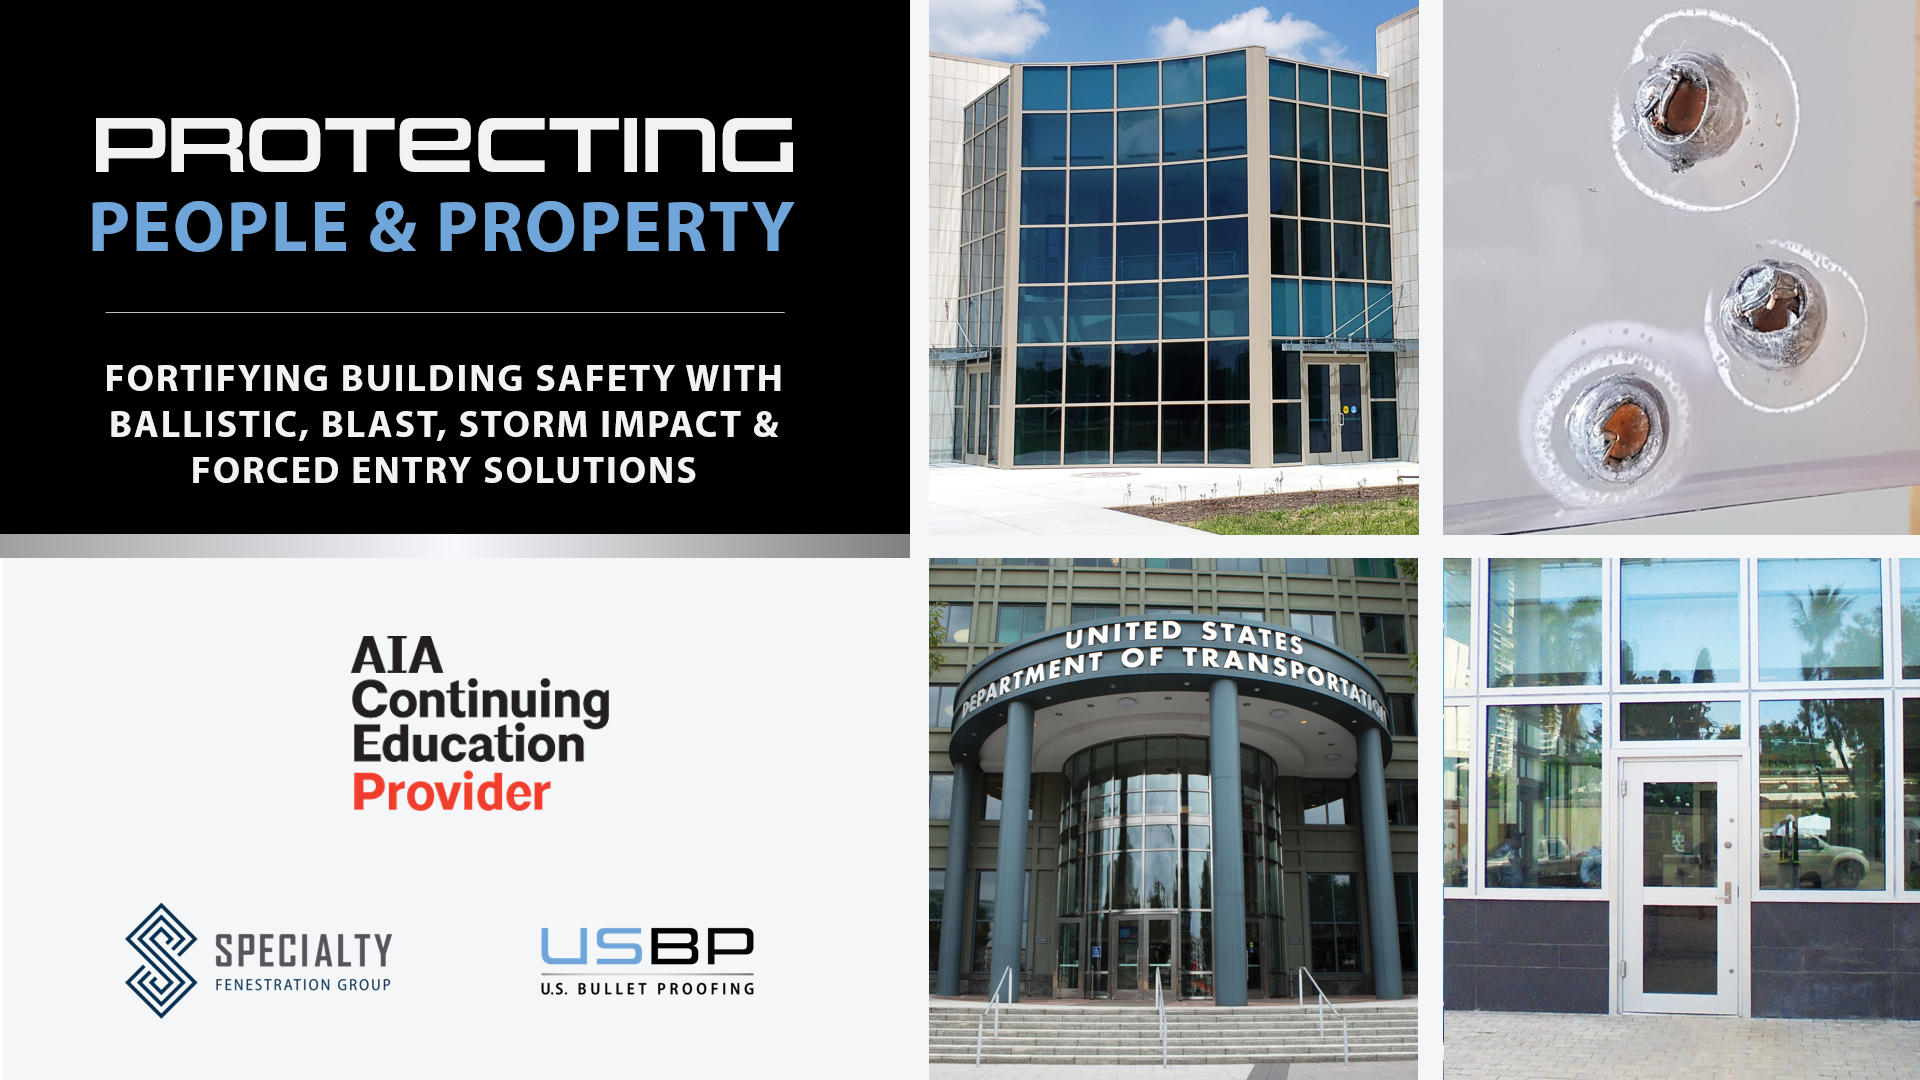 In-Person Lunch & Learn – RB&A: Dallas, TX – CEU Course: Protecting People & Property